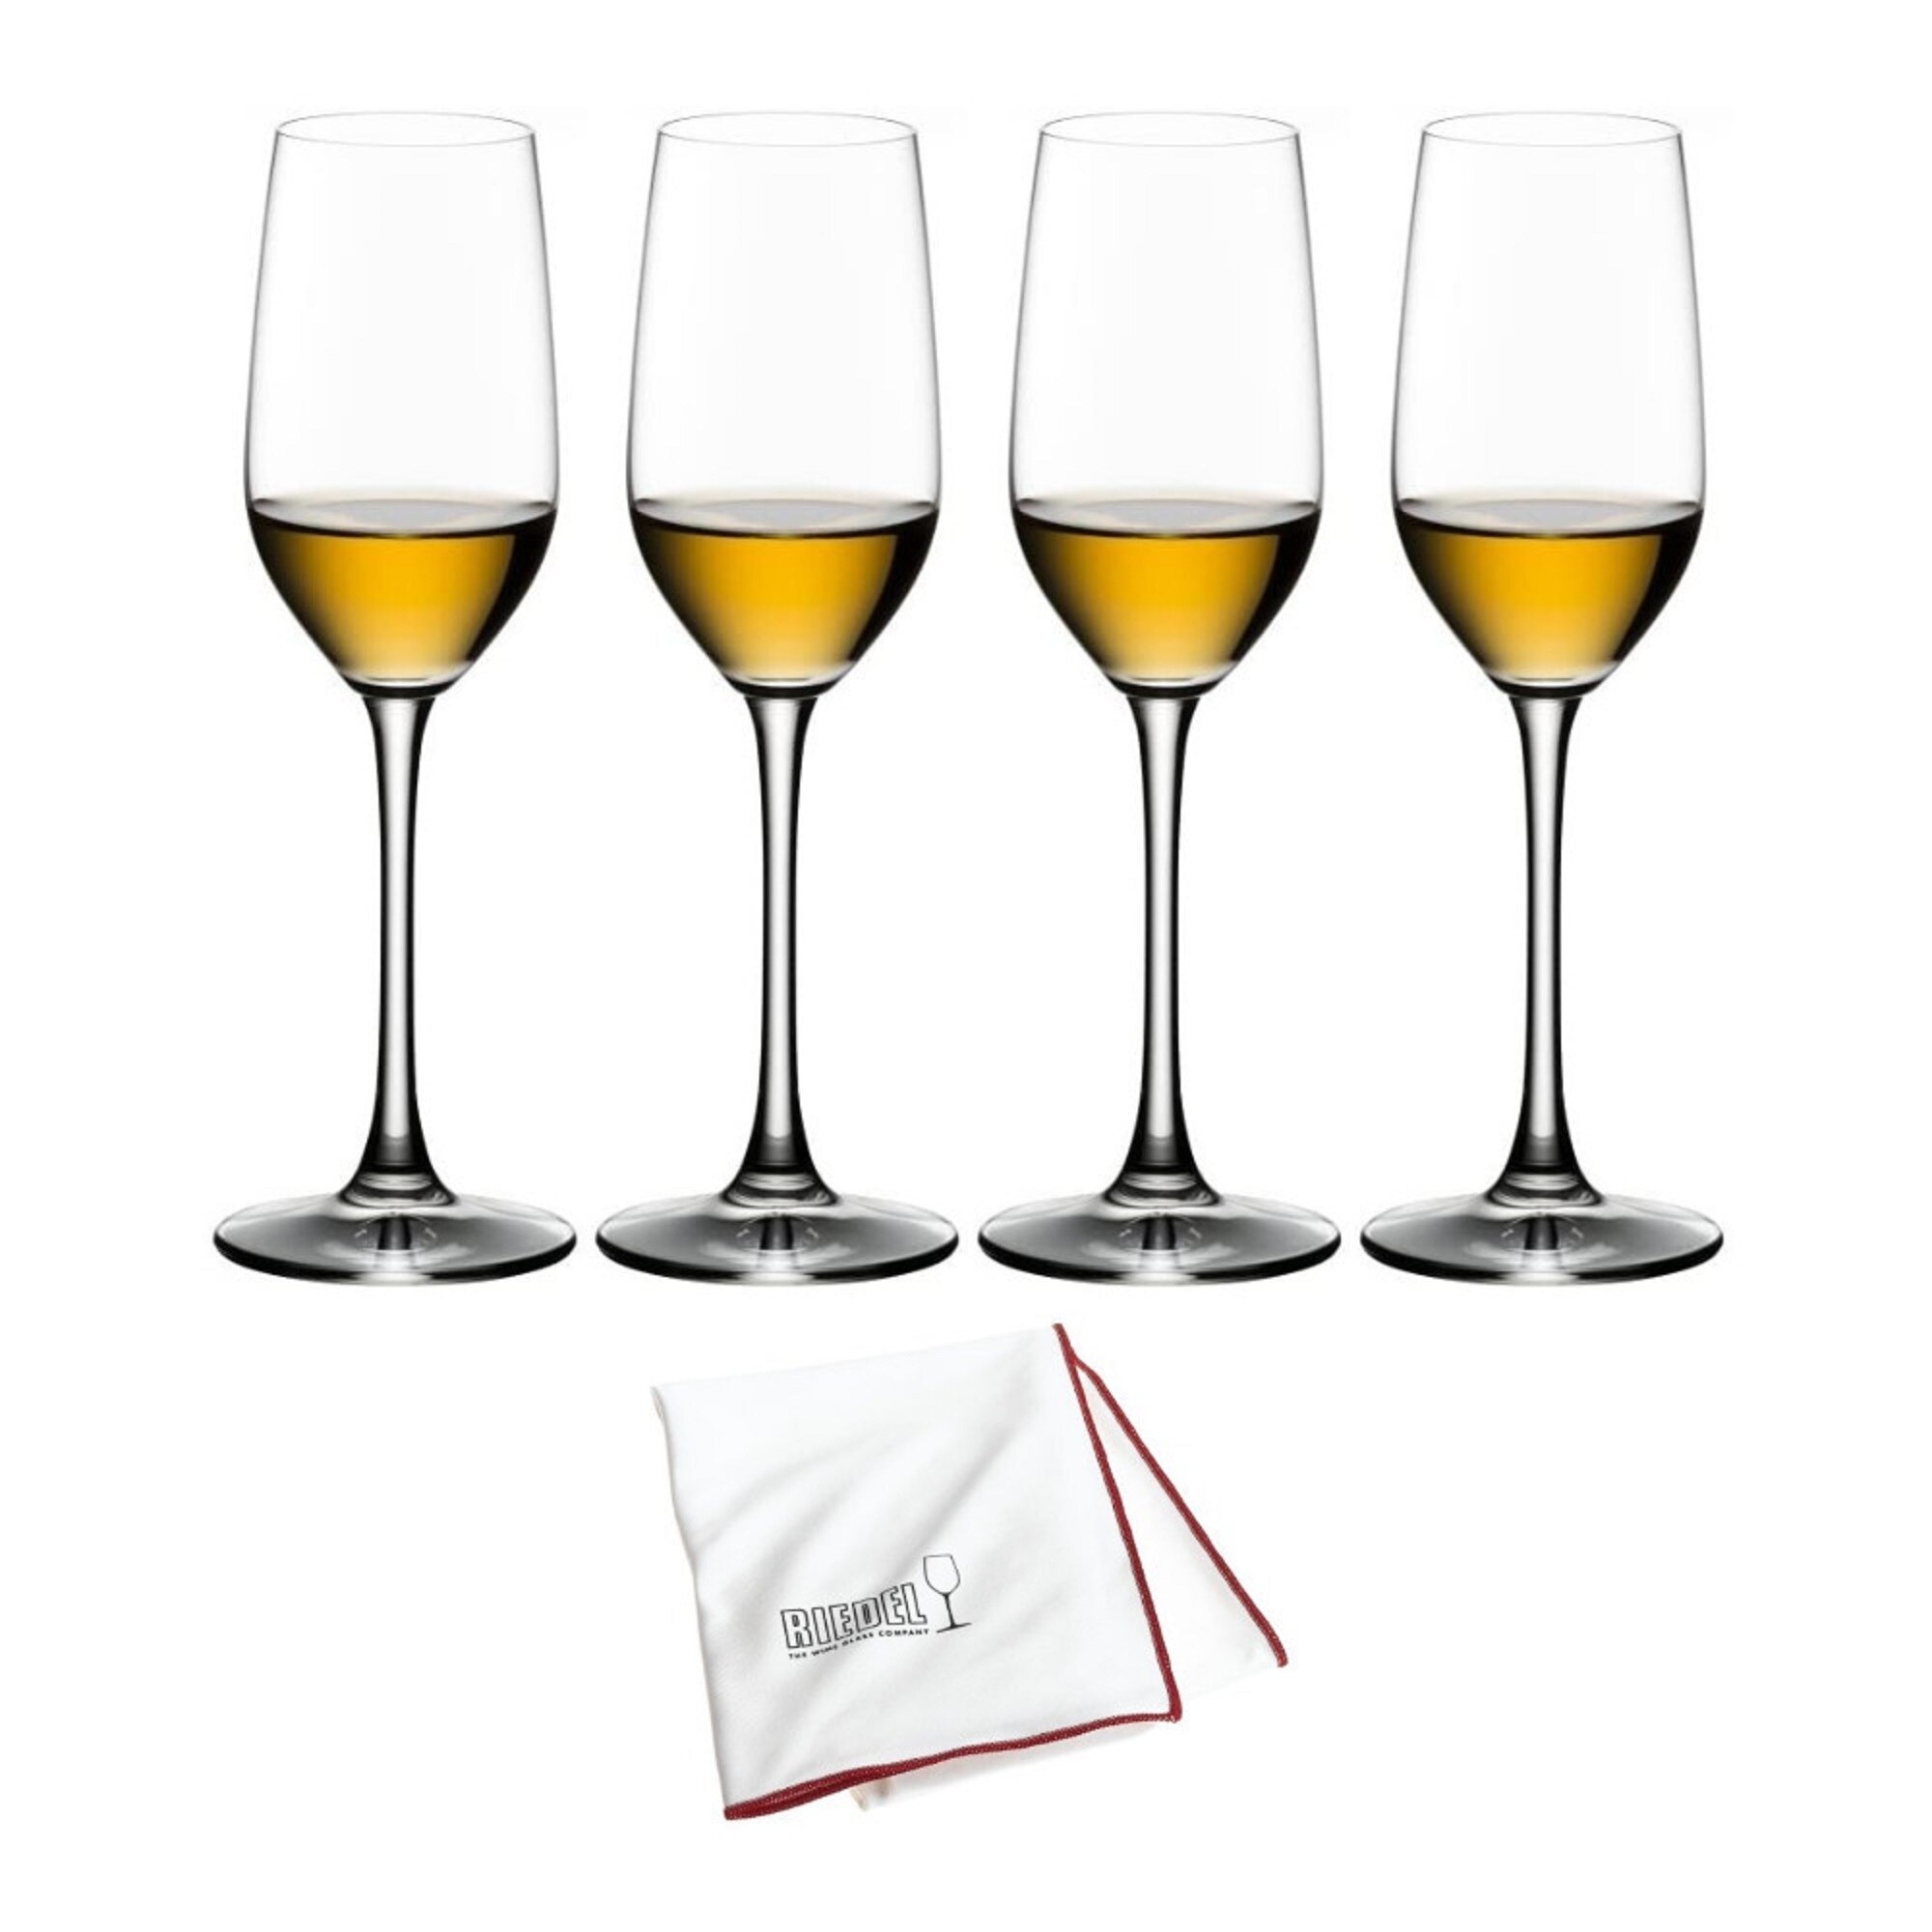 https://ak1.ostkcdn.com/images/products/is/images/direct/428342b7223049ce90cd5467a508923742d08008/Riedel-Bar-Ouverture-Tequila-Glasses-with-Microfiber-Polishing-Cloth.jpg